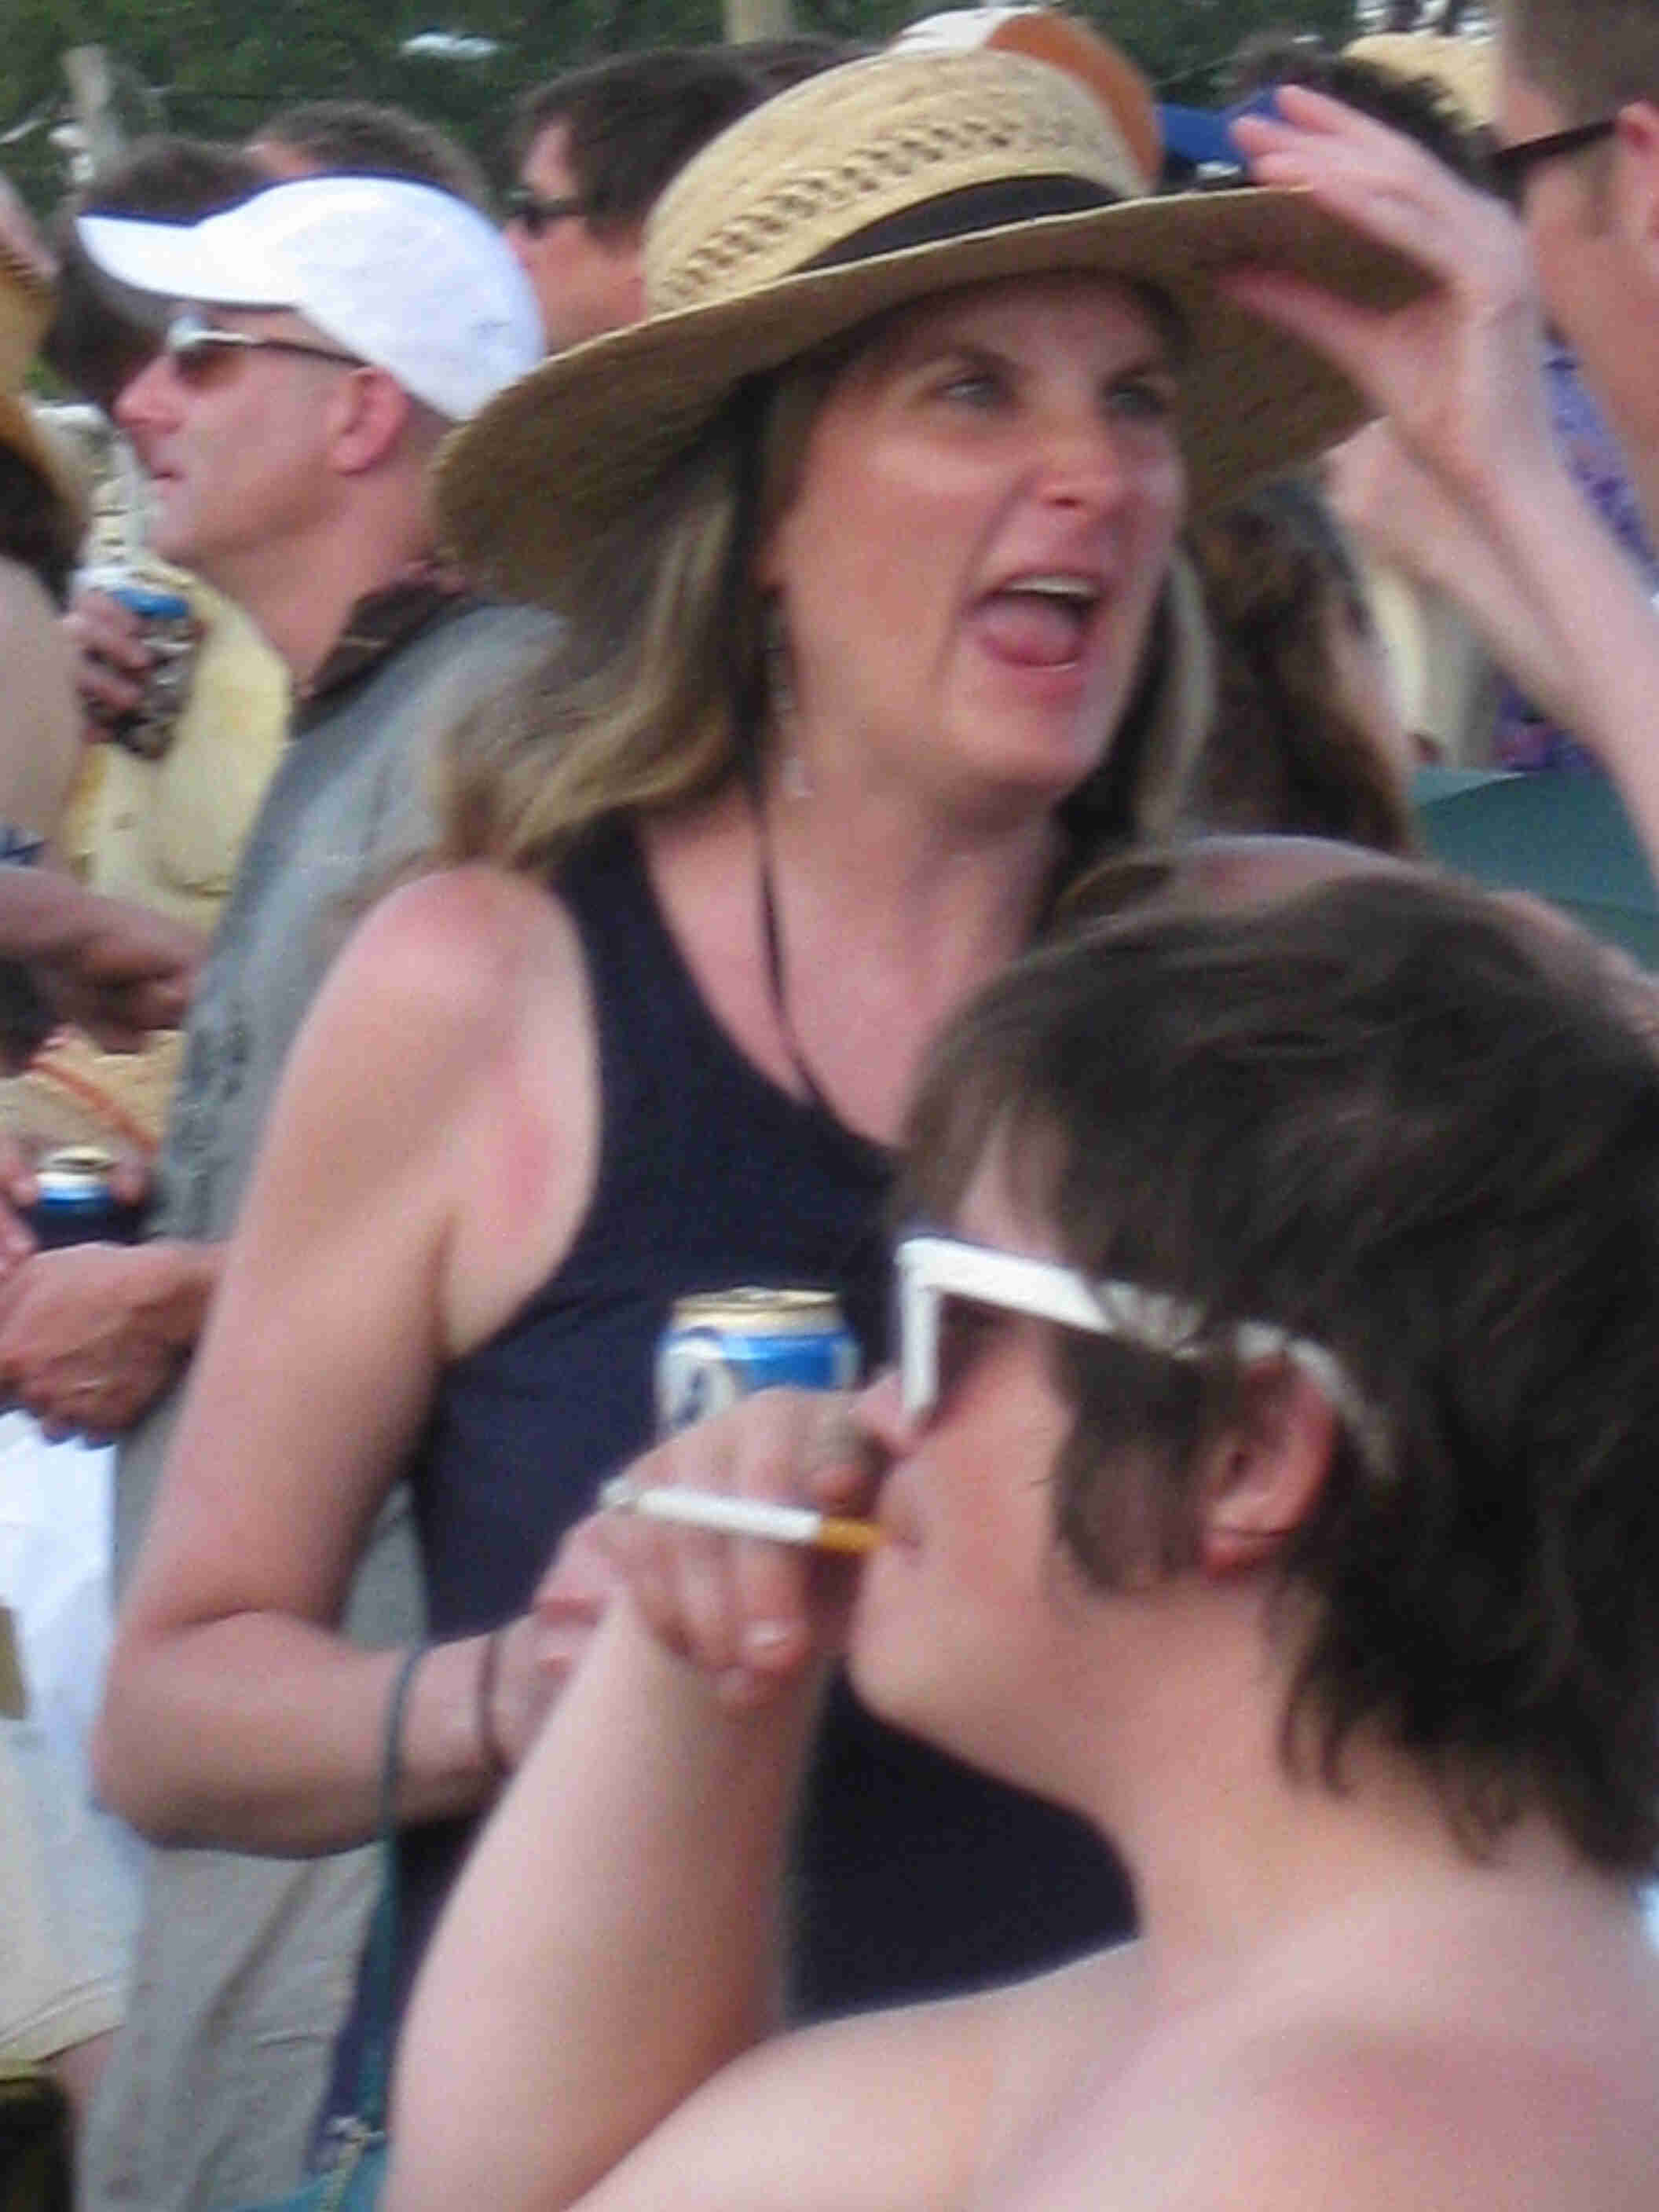 Front view of a person yelling and wearing a hat, with a shirtless person smoking a cigarette in front of them